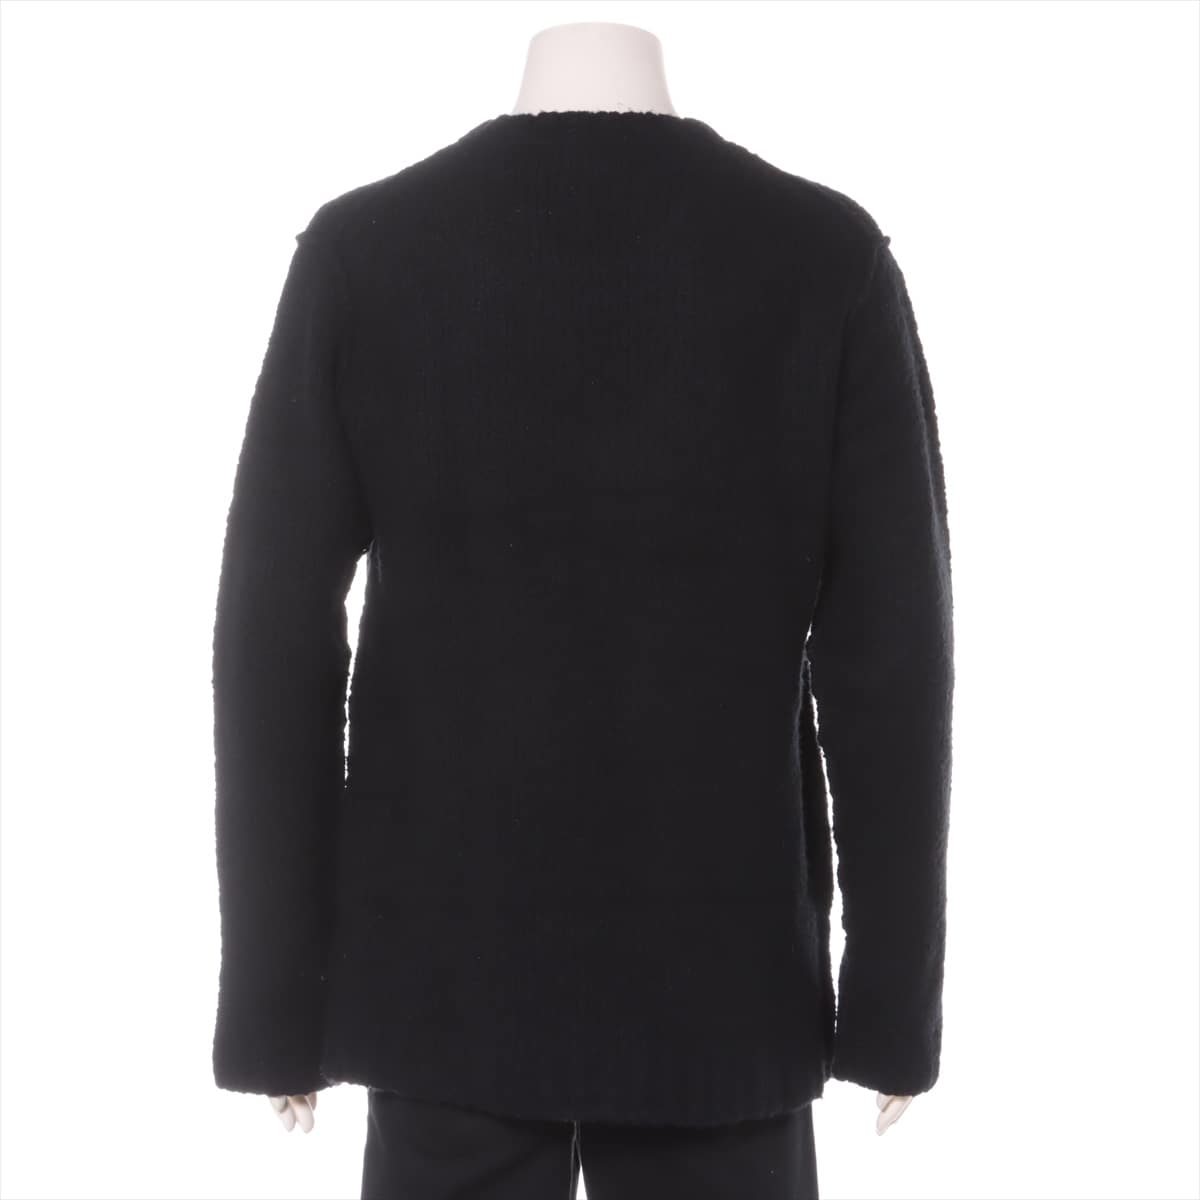 Yohji Yamamoto Pour Homme Apparel｜ALLU UK｜The Home of Pre-Loved 